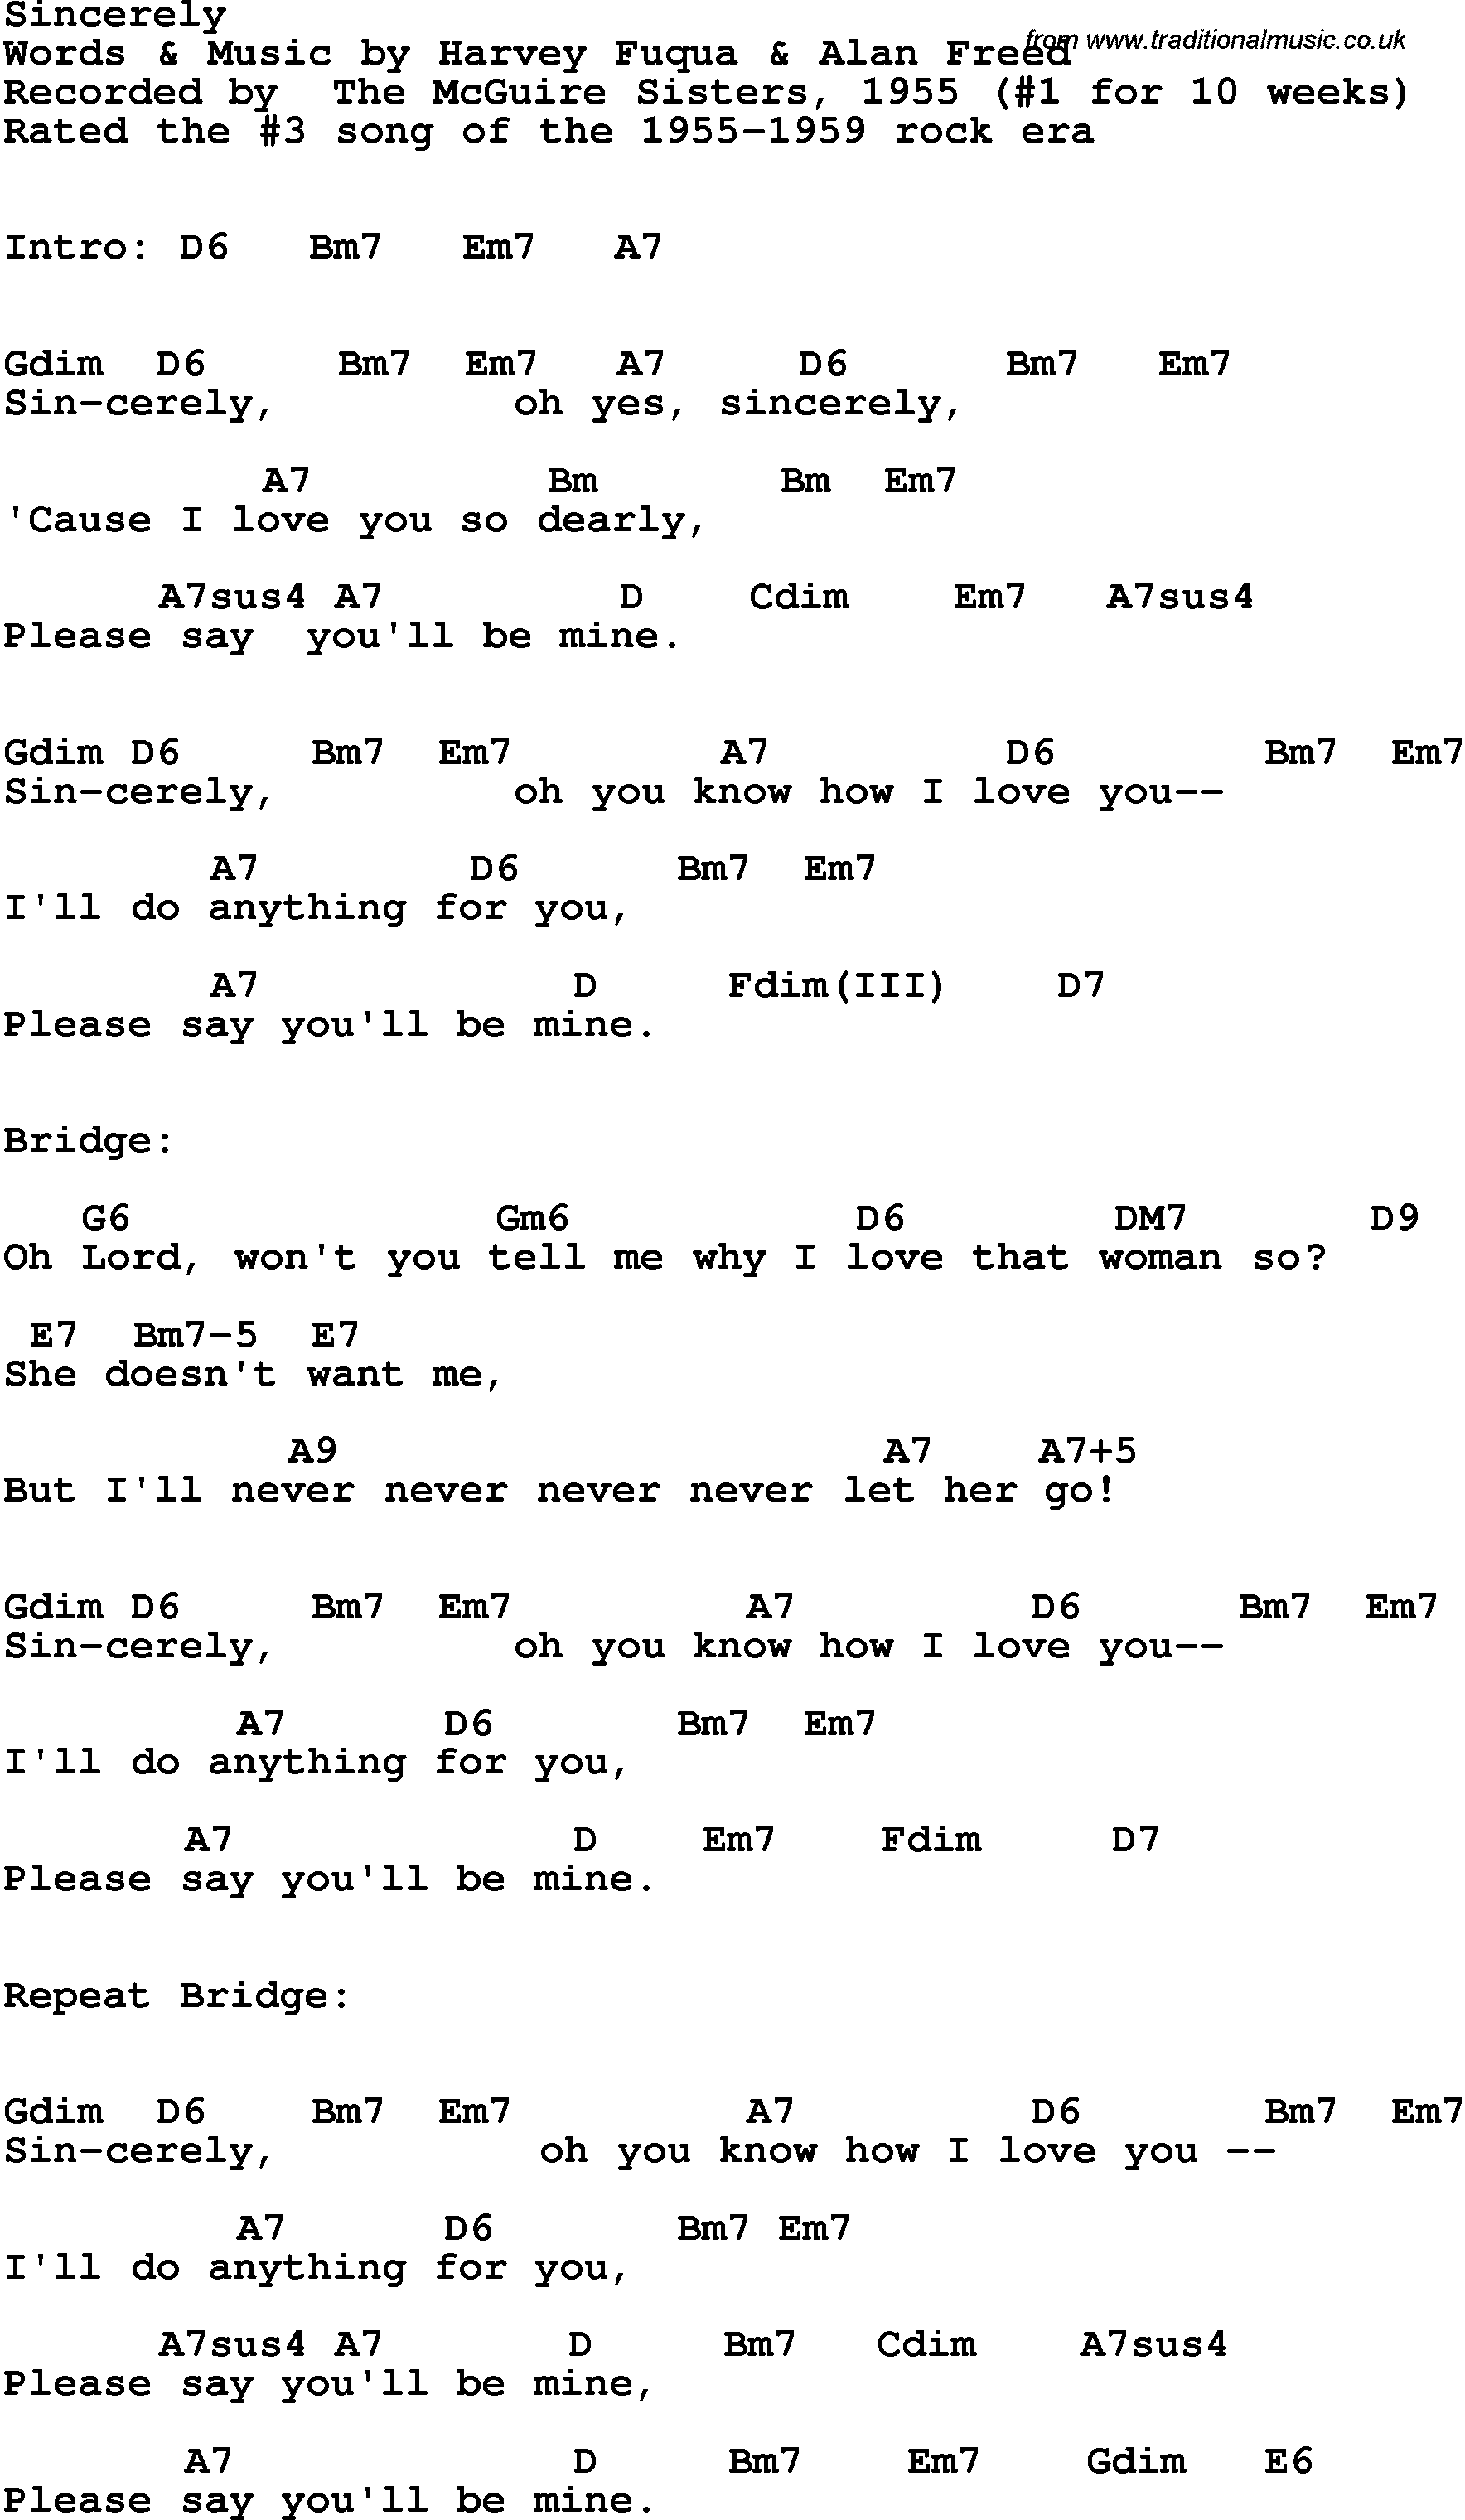 Song Lyrics with guitar chords for Sincerely - The Mcguire Sisters, 1955